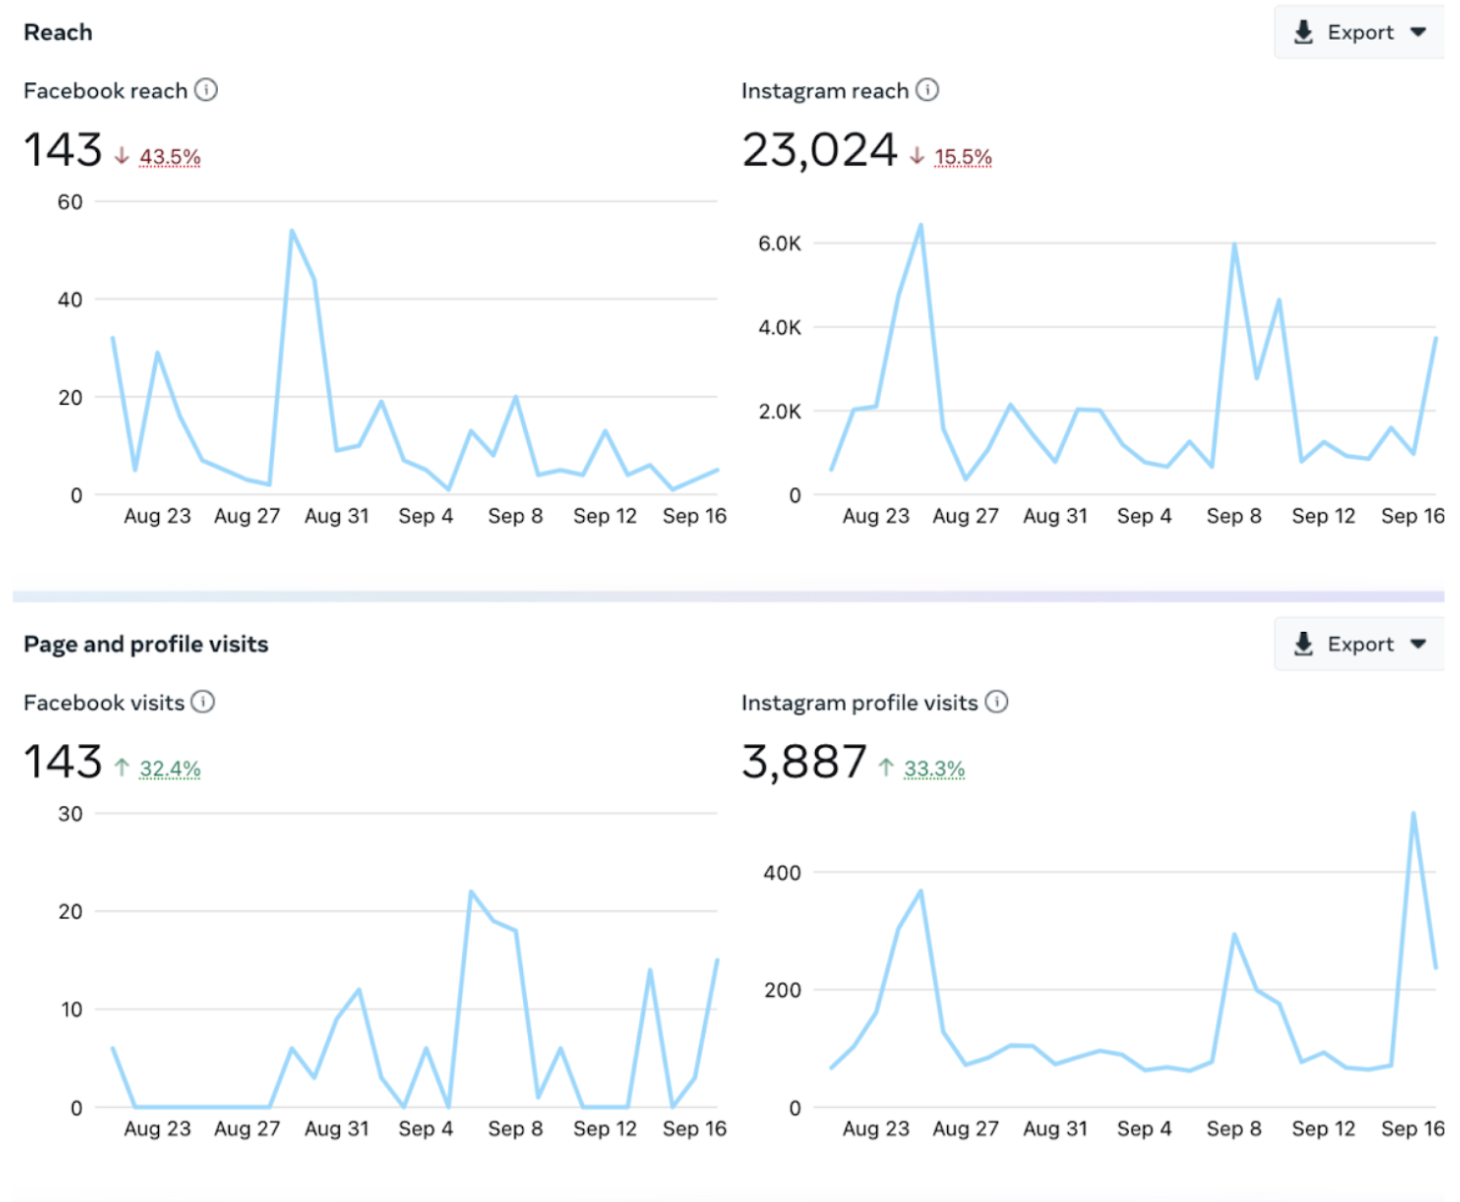 Preview of Results insights in Creator Studio. The image shows a detailed overview of data such as Facebook reach, Instagram reach, Facebook visits and Instagram profile visits. 